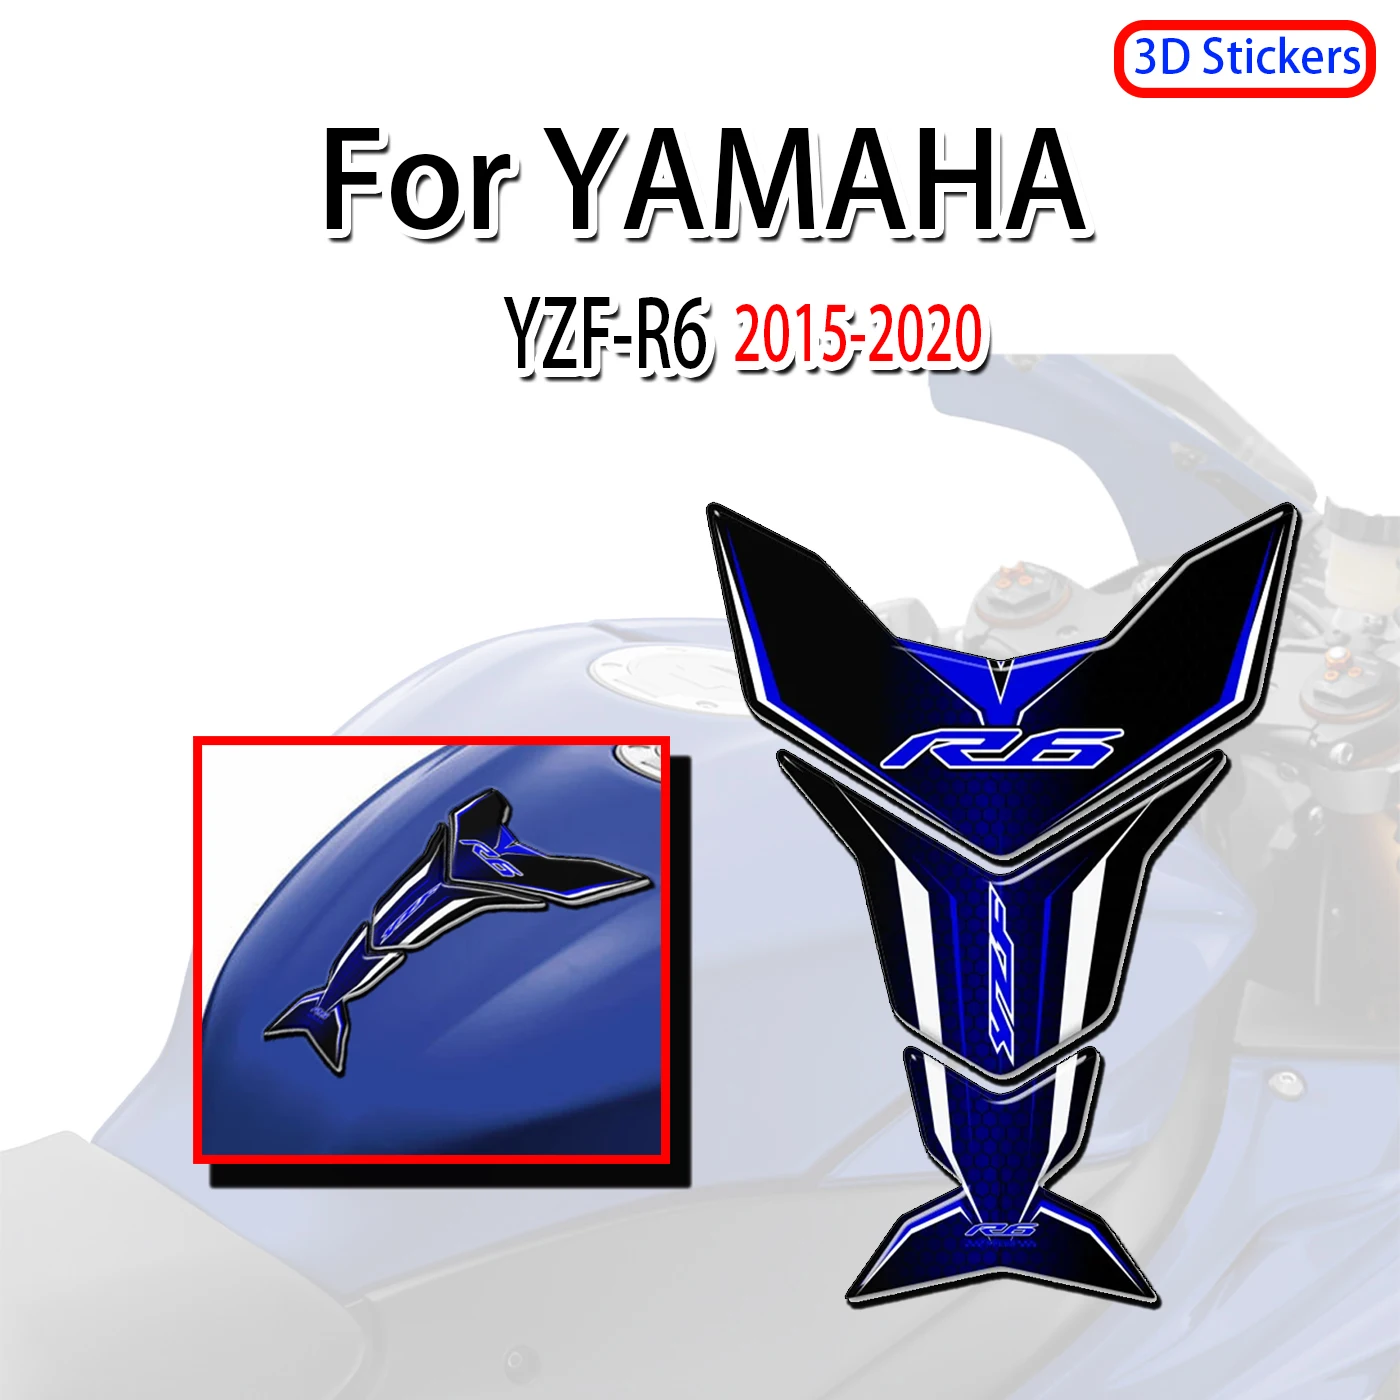 Motocycle Decal YZF R6 Tank Pad Stickers Decal Protector For YAMAHA YZF-R6 YZFR6 Fairing Emblem Badge Logo R6 Knee 2015-2020 welly 1 12 2020 yzf r6 yzfr6 motorcycle models alloy model motor bike miniature race toy for gift collection